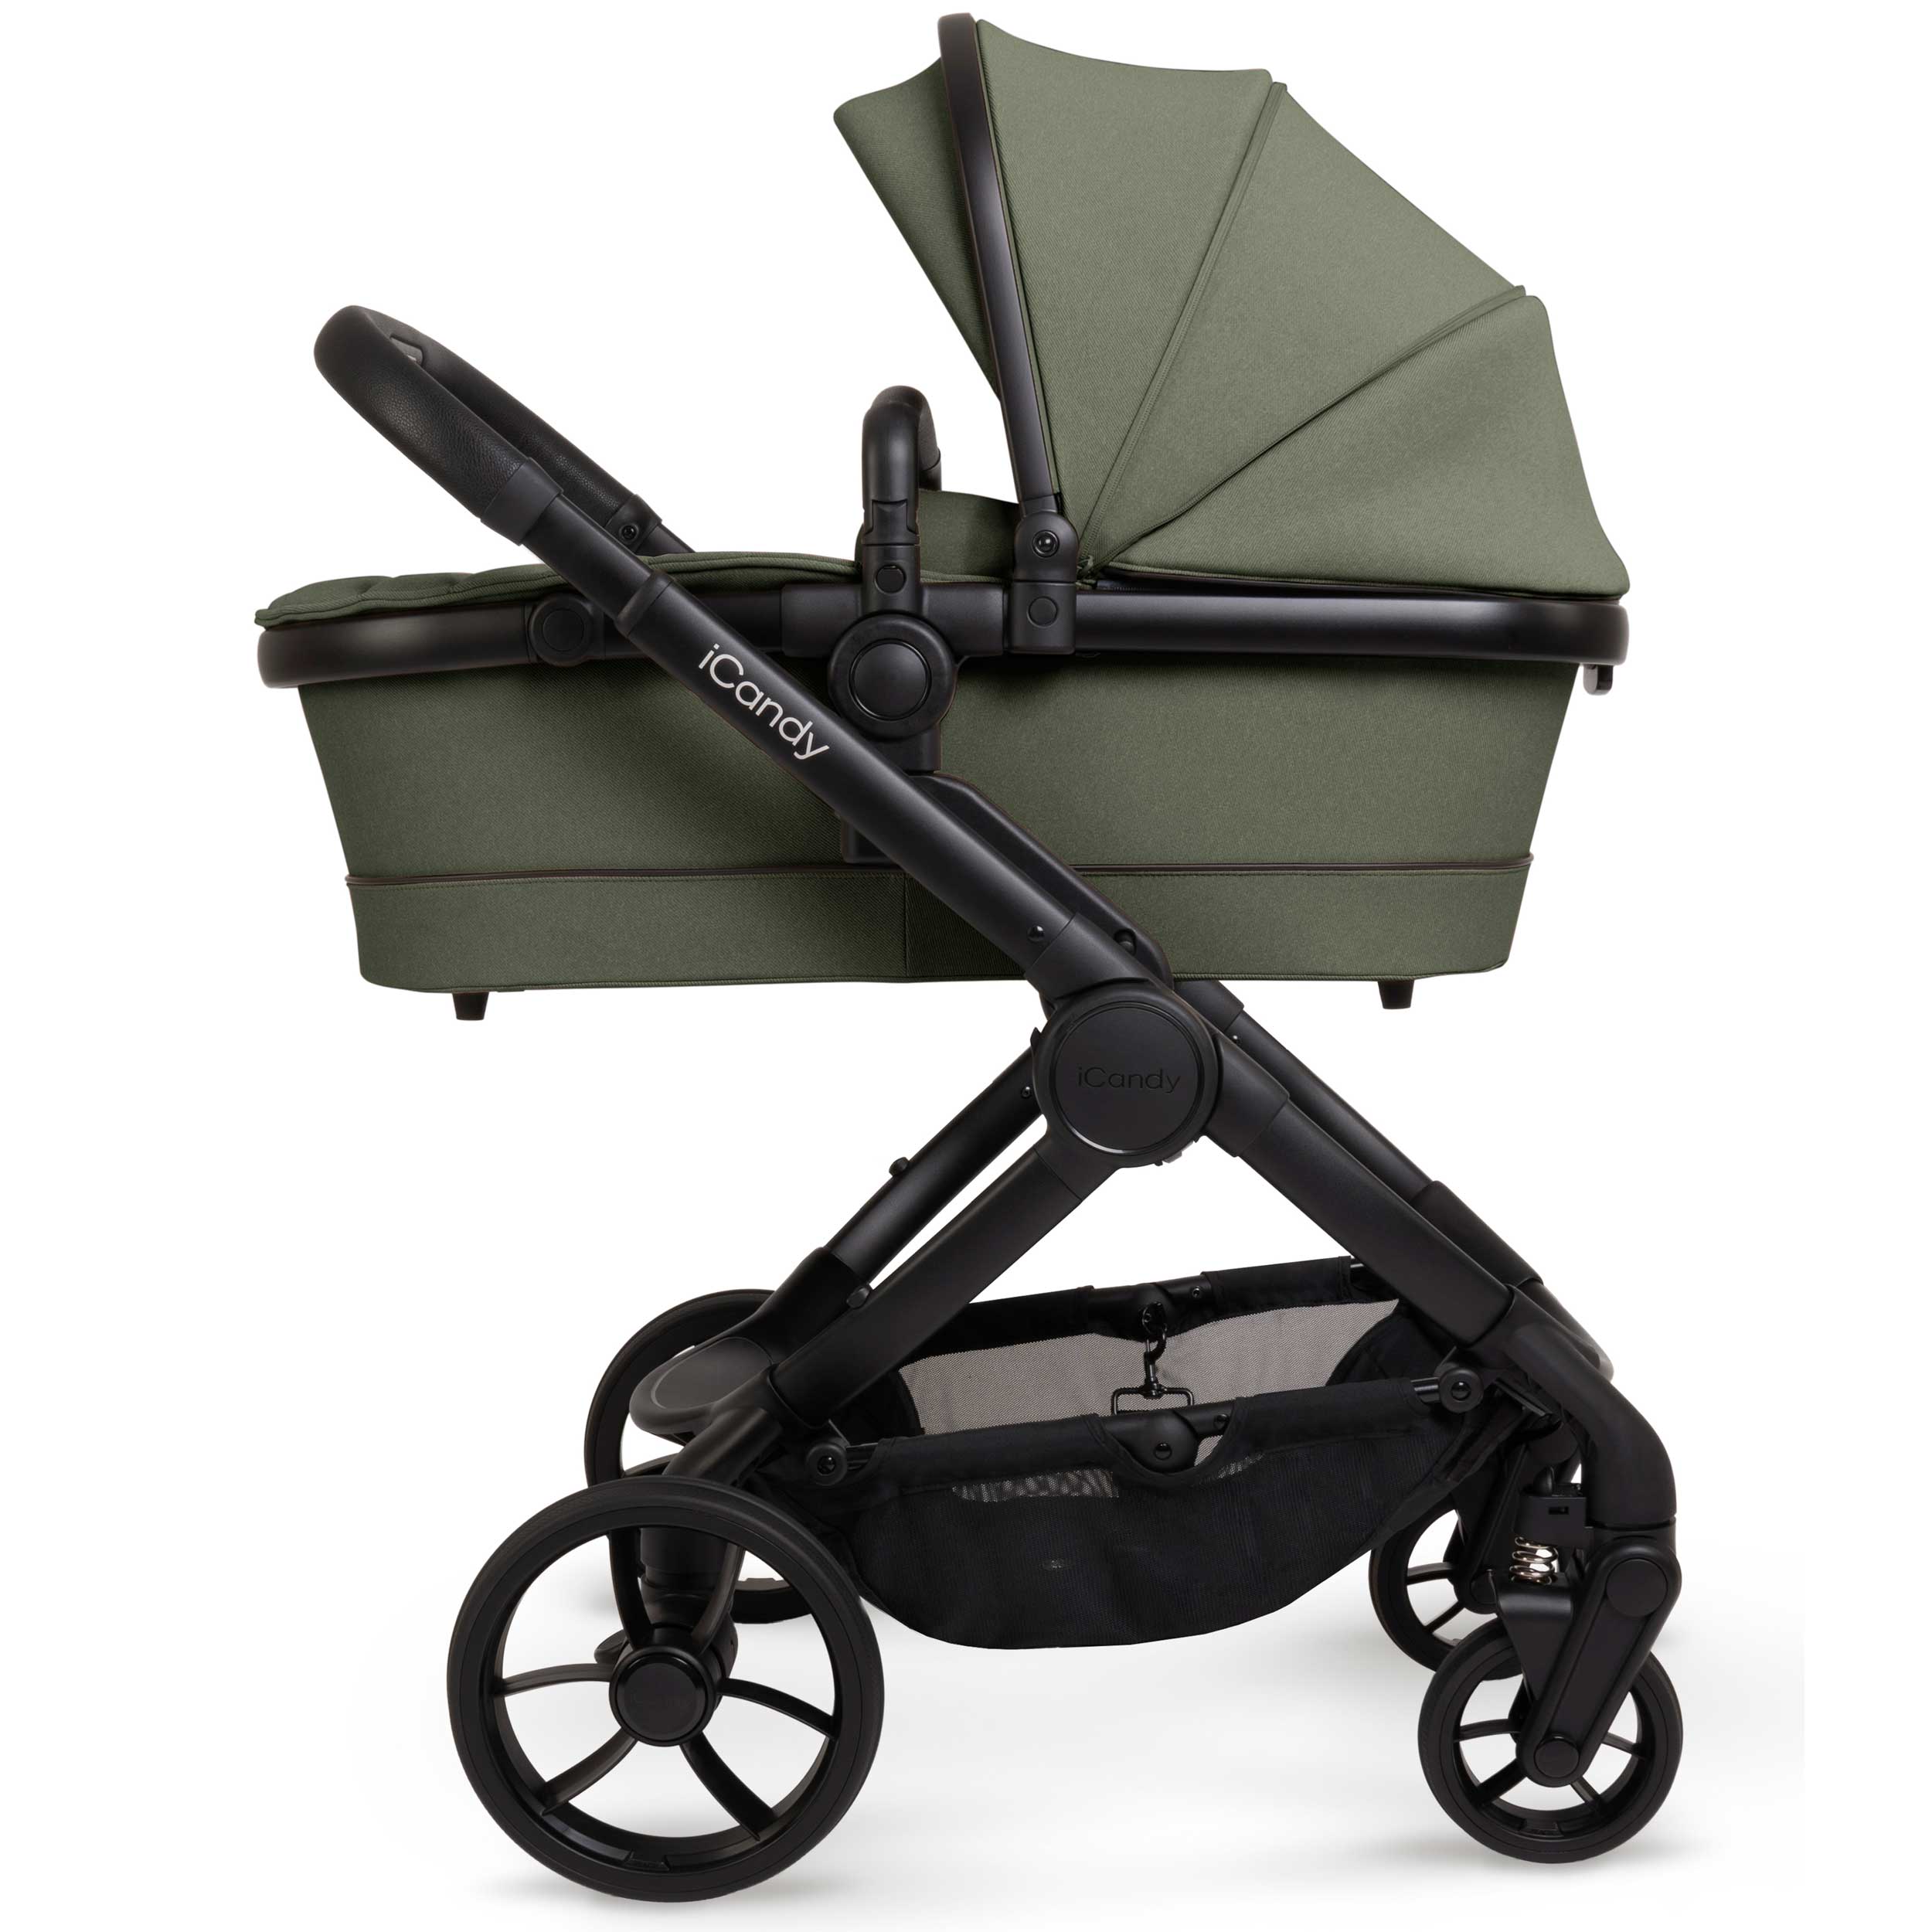 iCandy Peach 7 Cybex Combo Set in Ivy